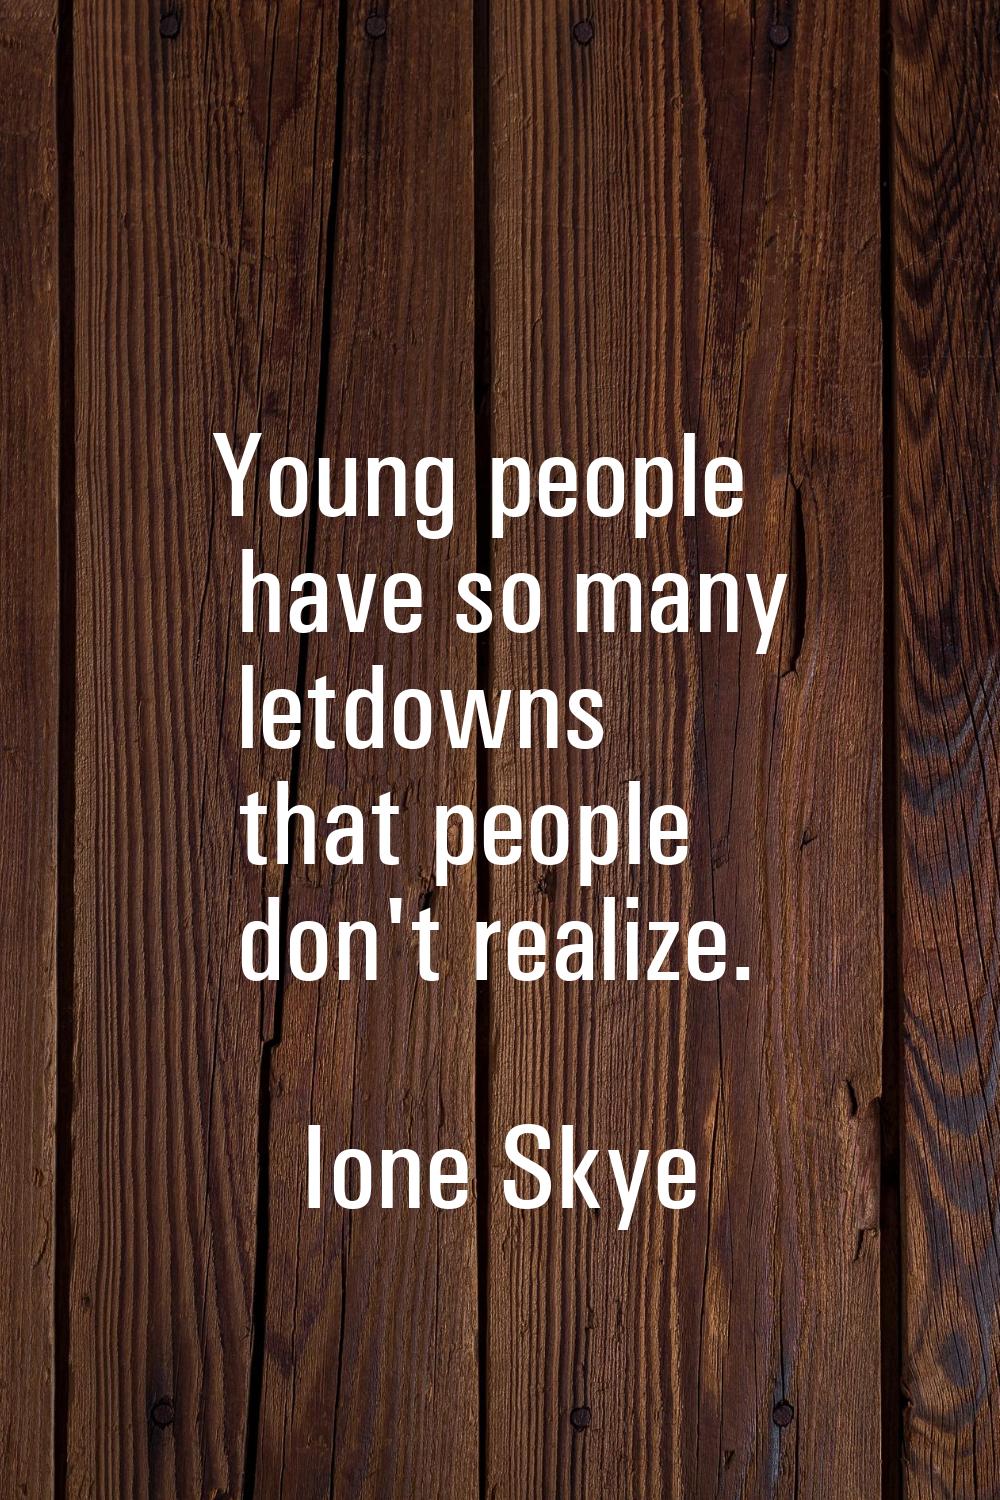 Young people have so many letdowns that people don't realize.